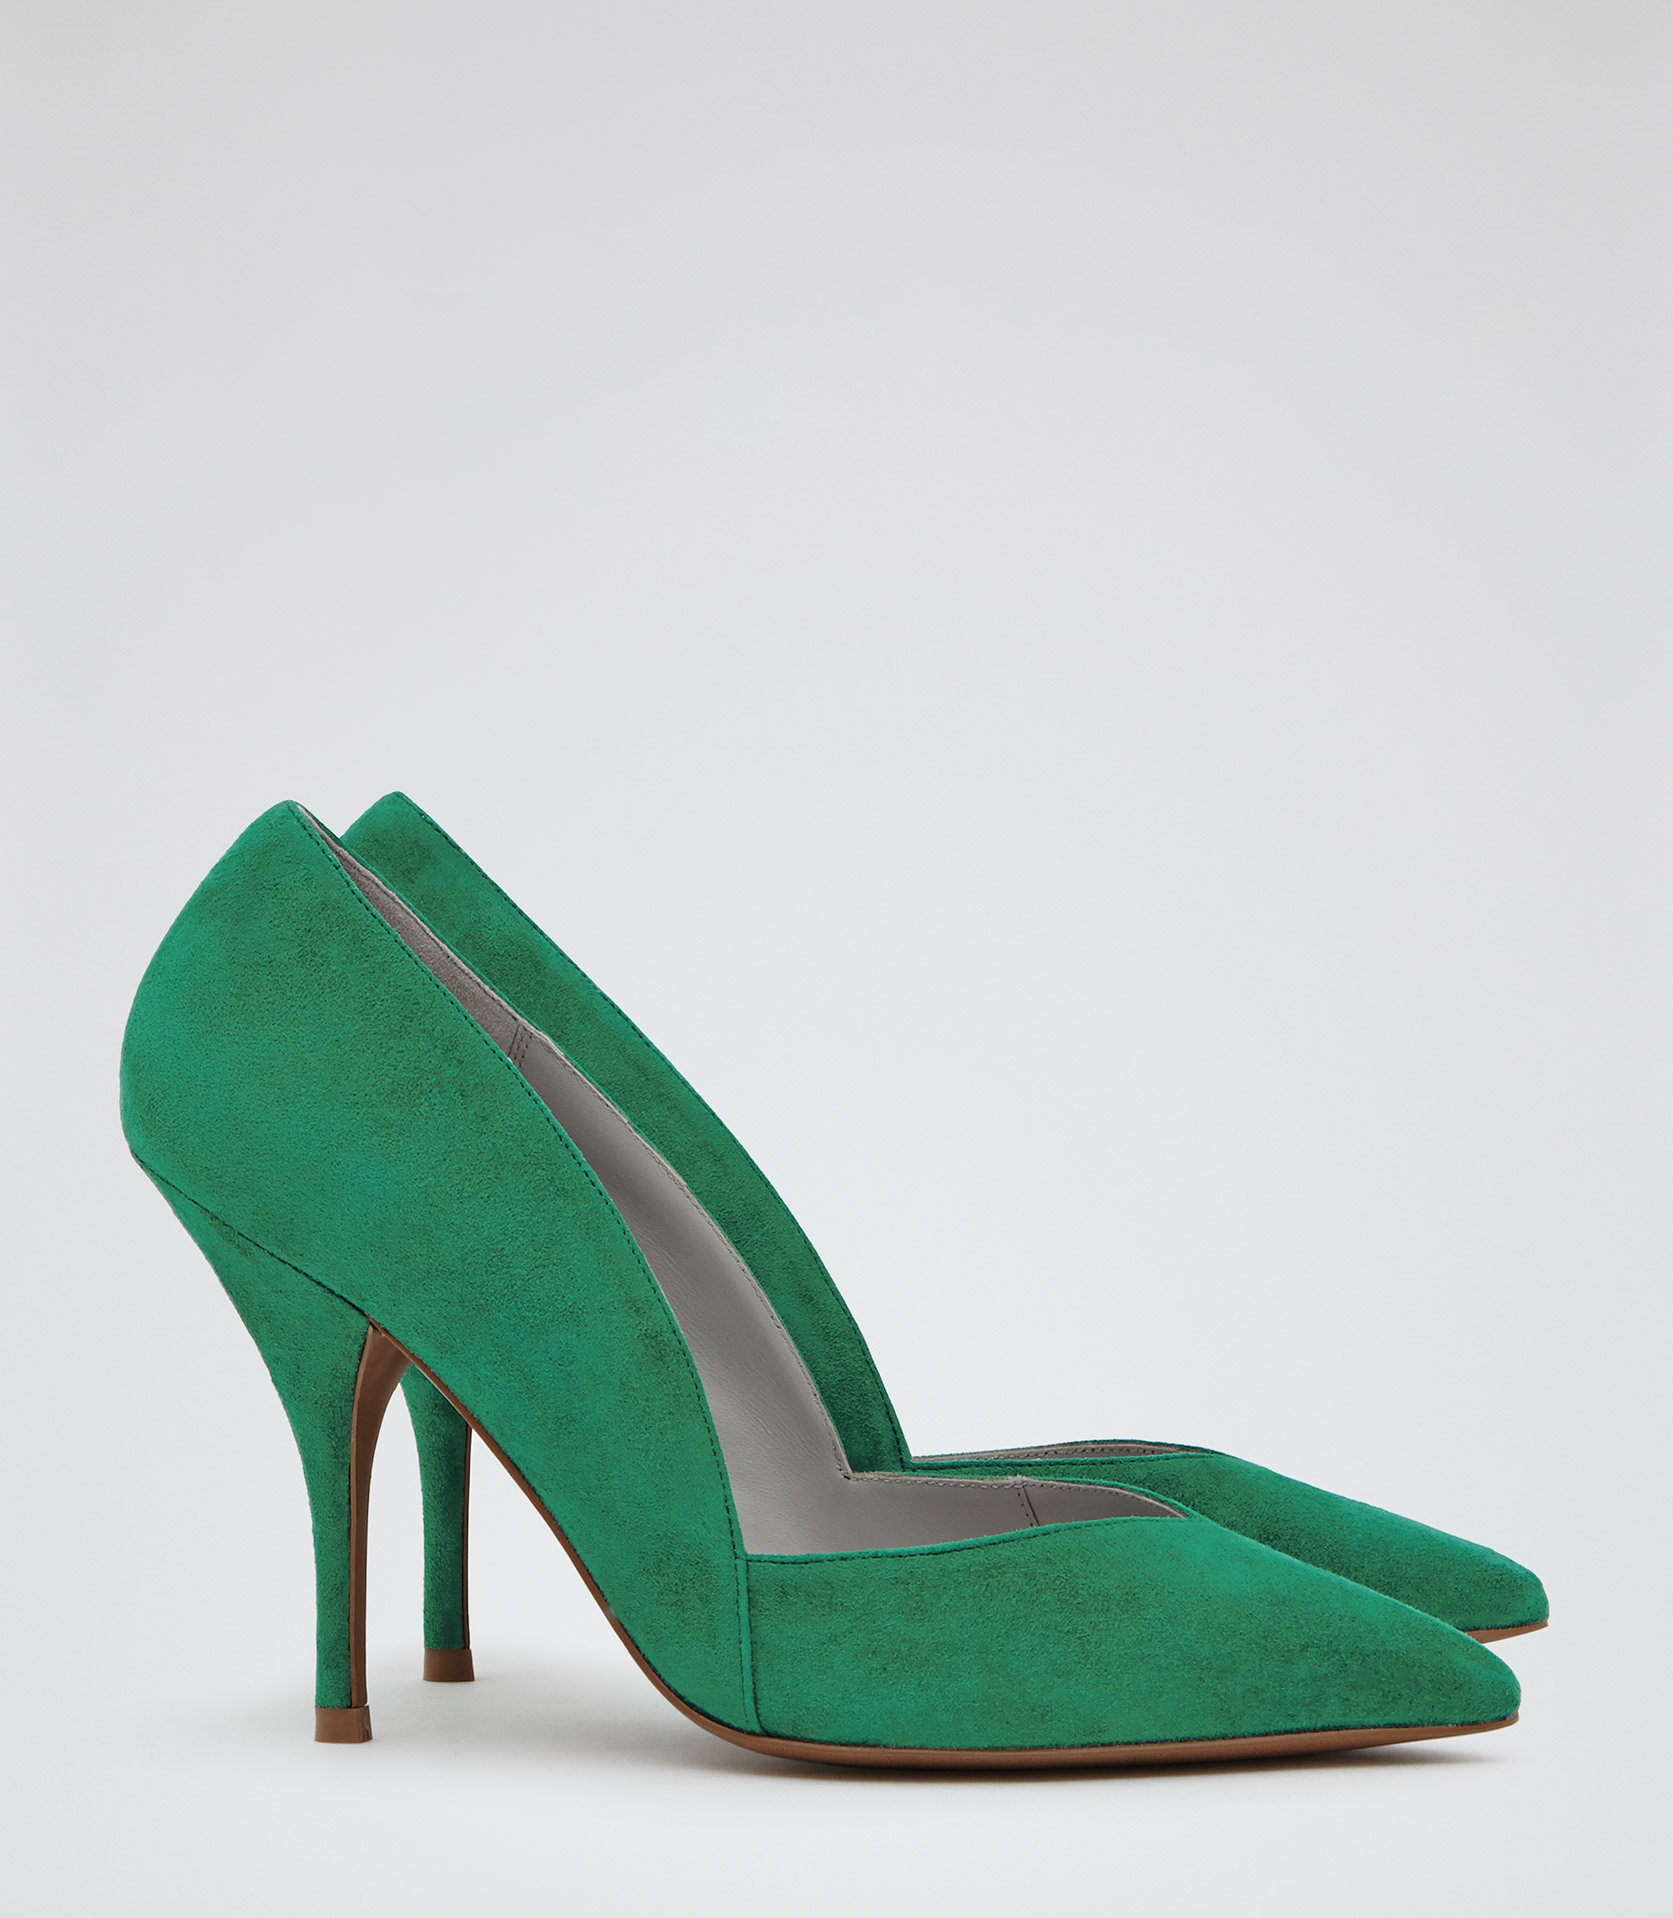 Reiss Arya Suede Court Shoes in Green - Lyst